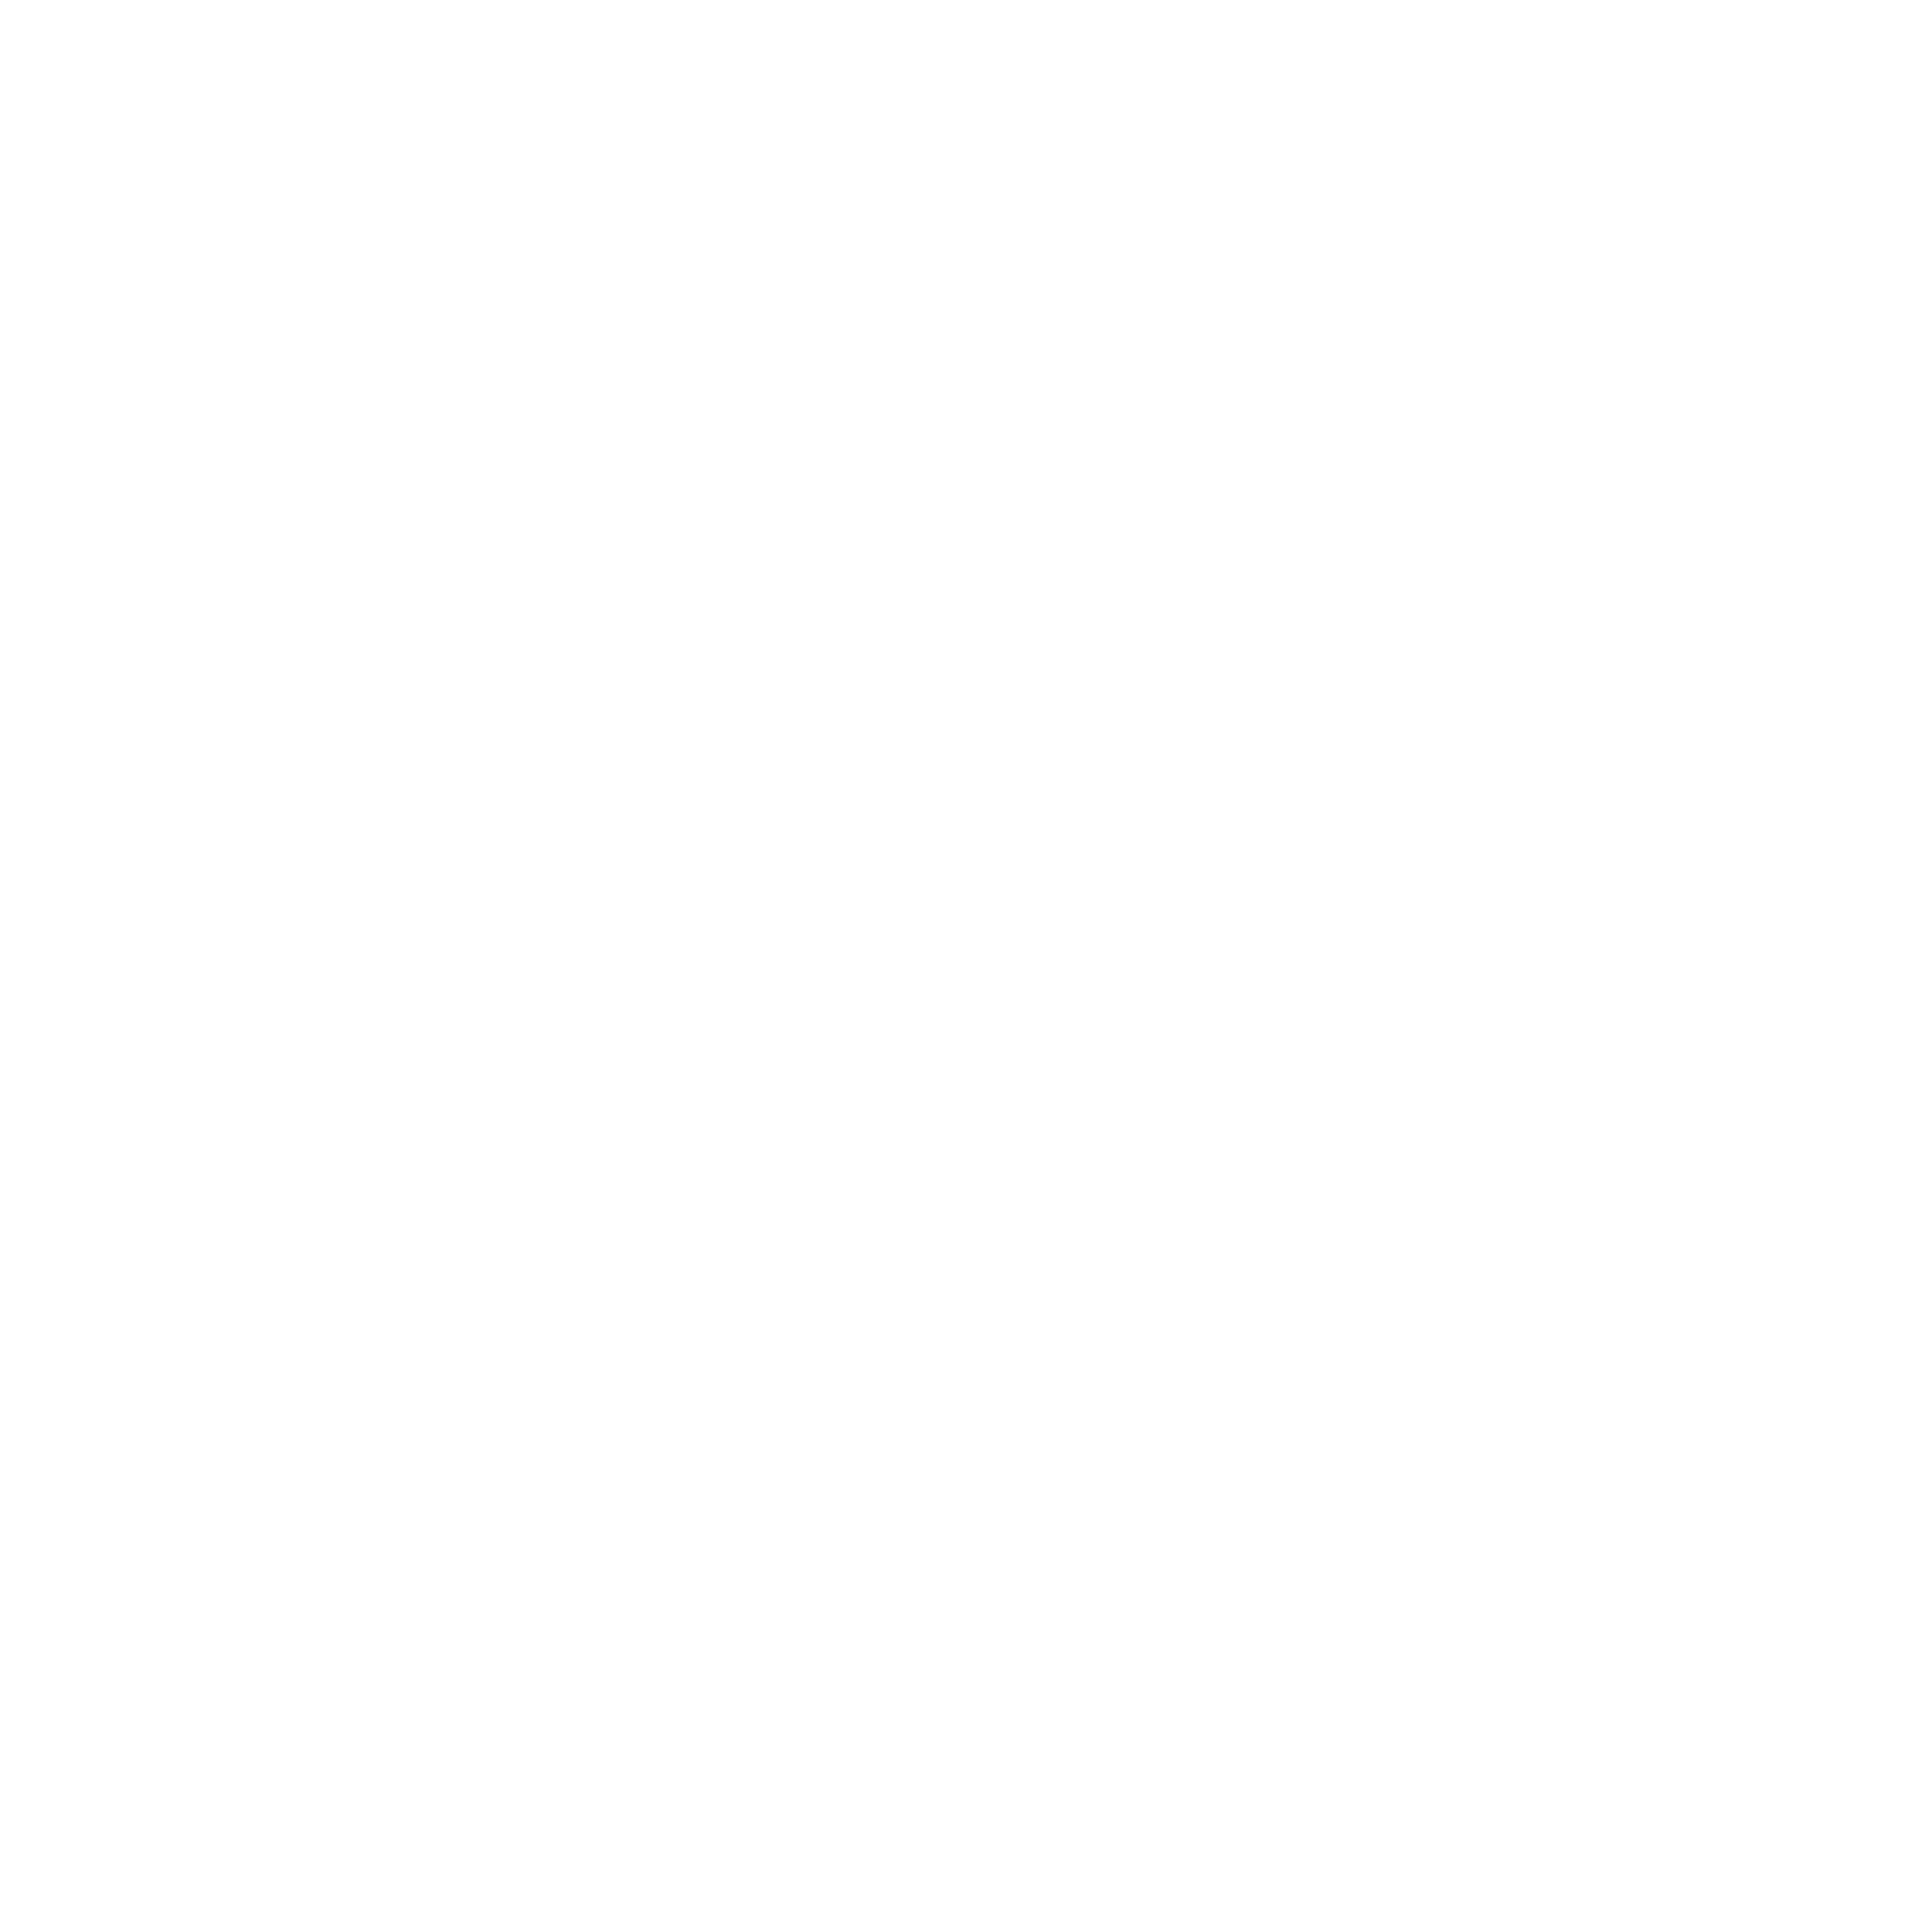 PeoplePC Logo - PeoplePC Logo PNG Transparent & SVG Vector - Freebie Supply